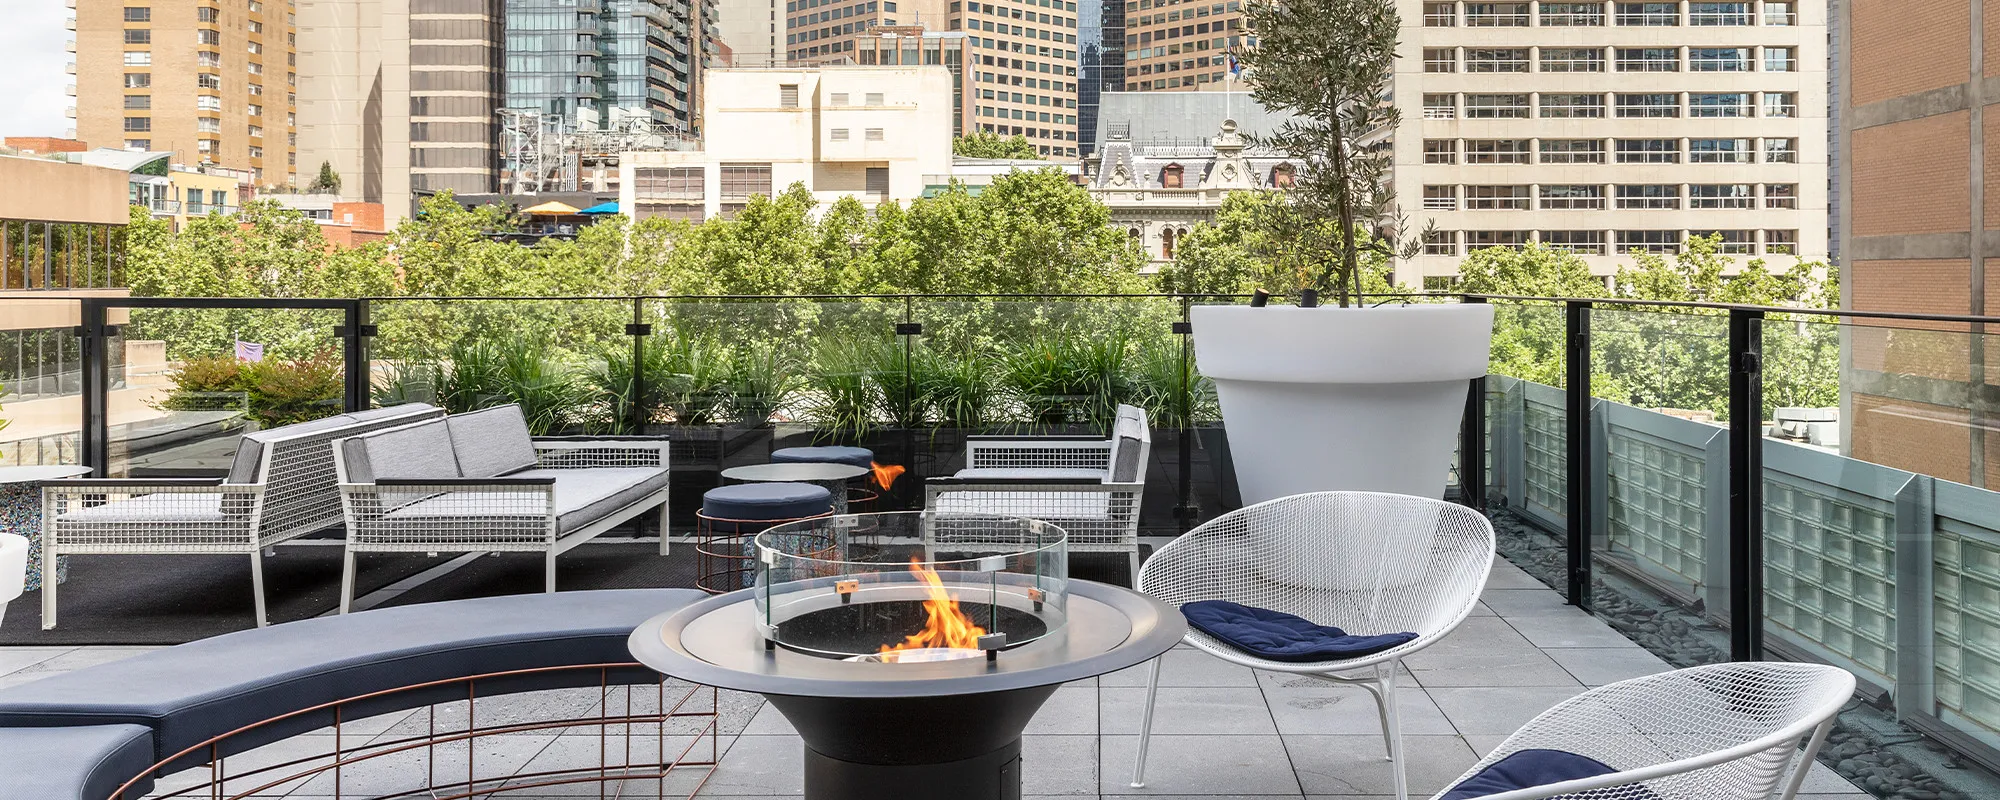 Lancemore Crossley st Boutique Luxury Accommodations Melbourne rooftop terrace Events 2000 x 800 6 v2